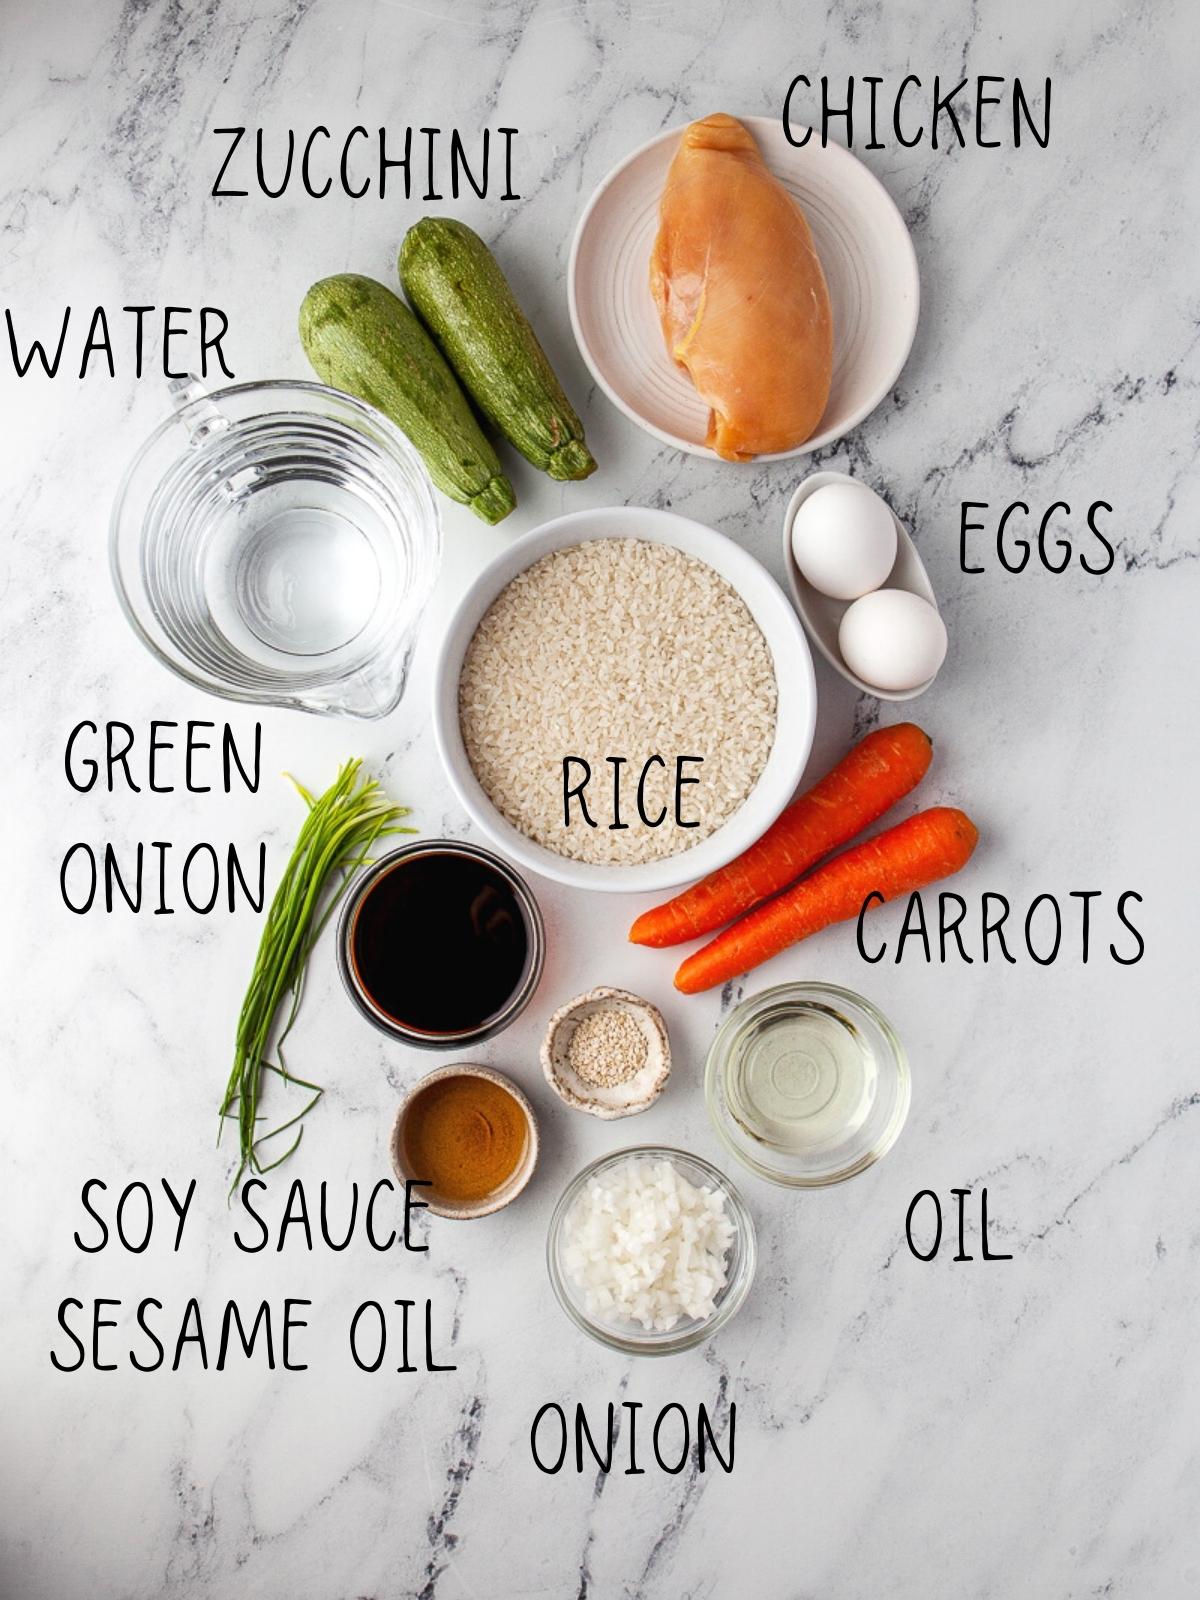 ingredients for instant pot chicken fried rice, including soy sauce, carrots, zucchini, eggs, sesame oil, and soy sauce